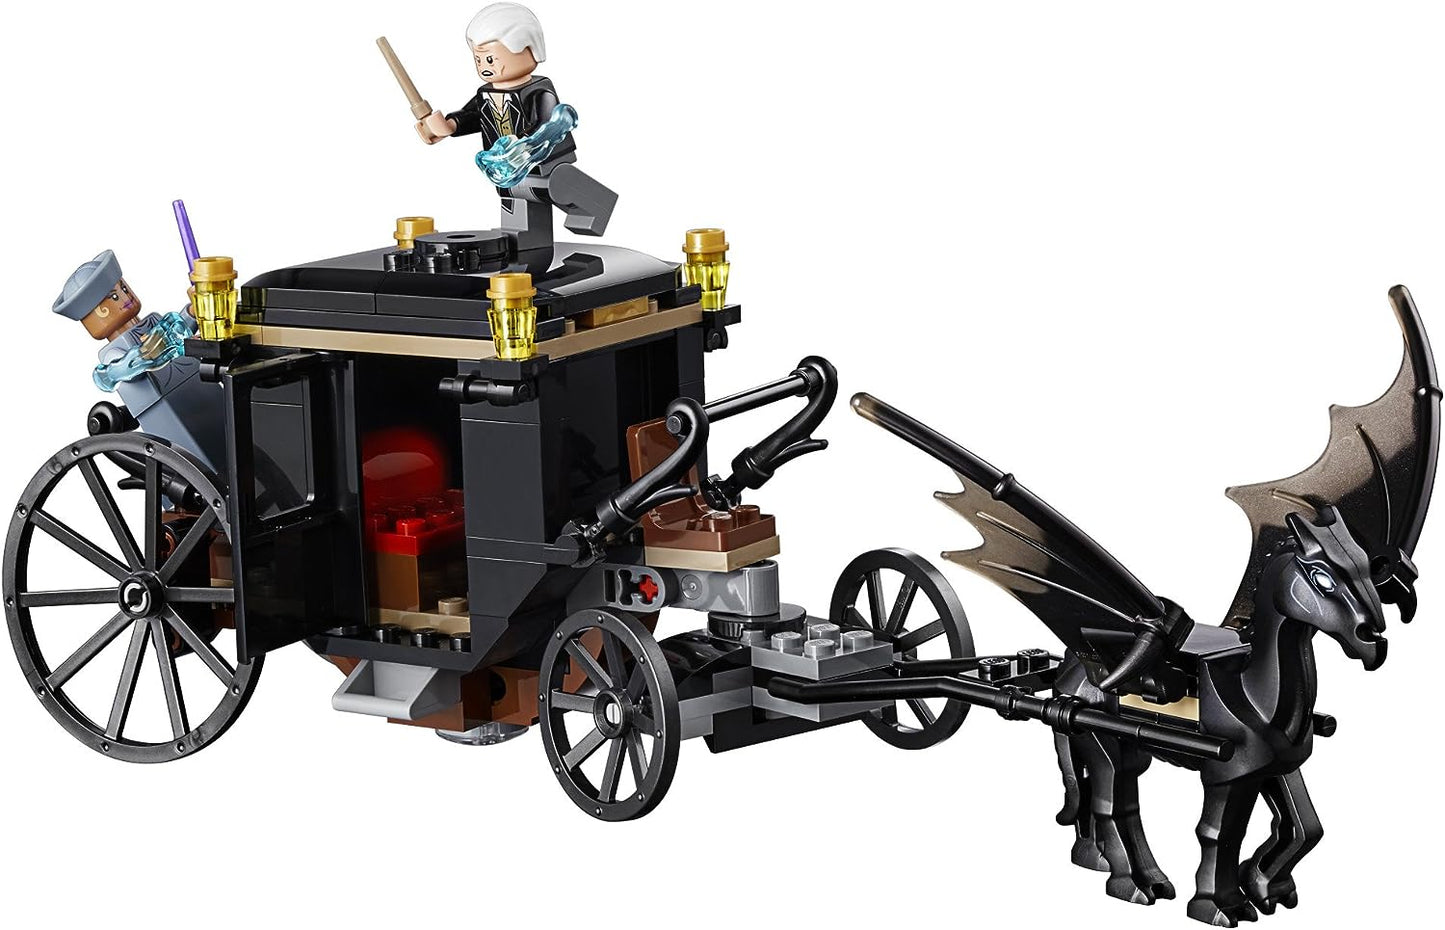 LEGO Fantastic Beasts: The Crimes of Grindelwald - Grindelwaldâ€™s Escape 75951 Building Kit (132 Pieces) (Discontinued by Manufacturer)